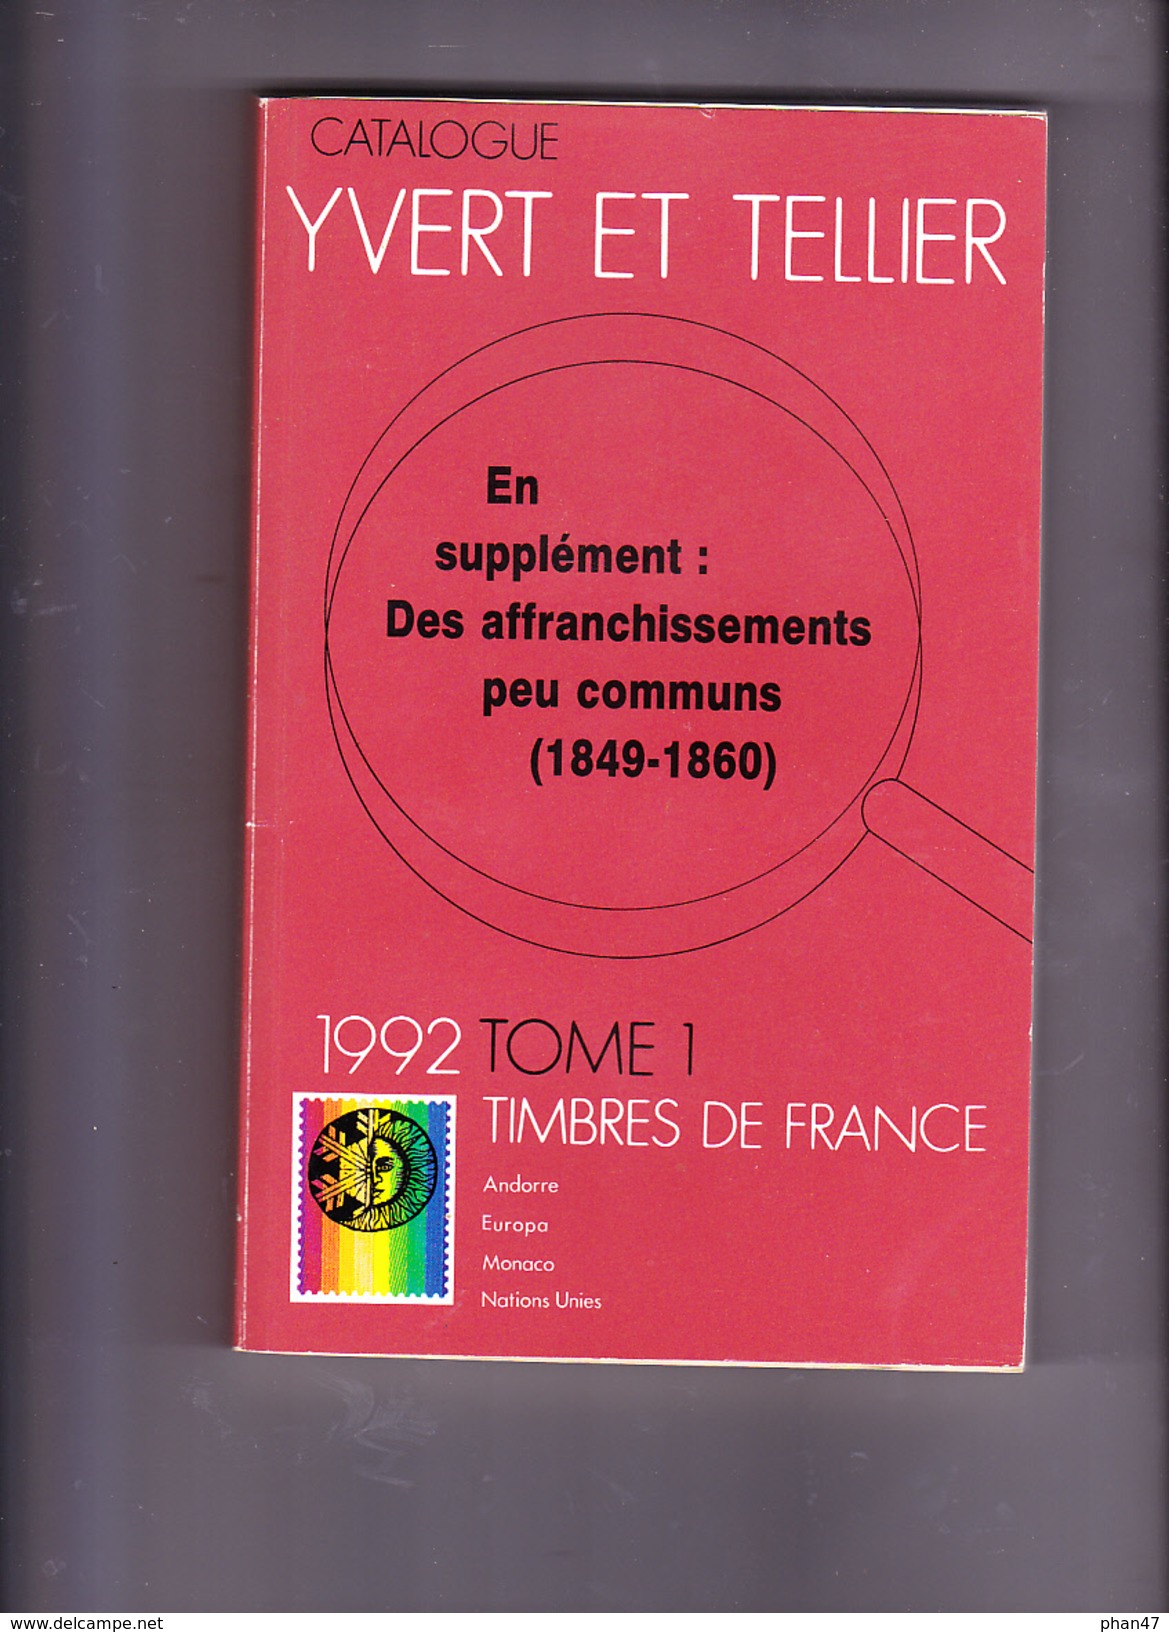 CATALOGUE DE TIMBRES-POSTE YVERT & TELLIER, 1992, Tome I, France, Andorre, Europa, Monaco, Nations Unies 490 Pages - Francia